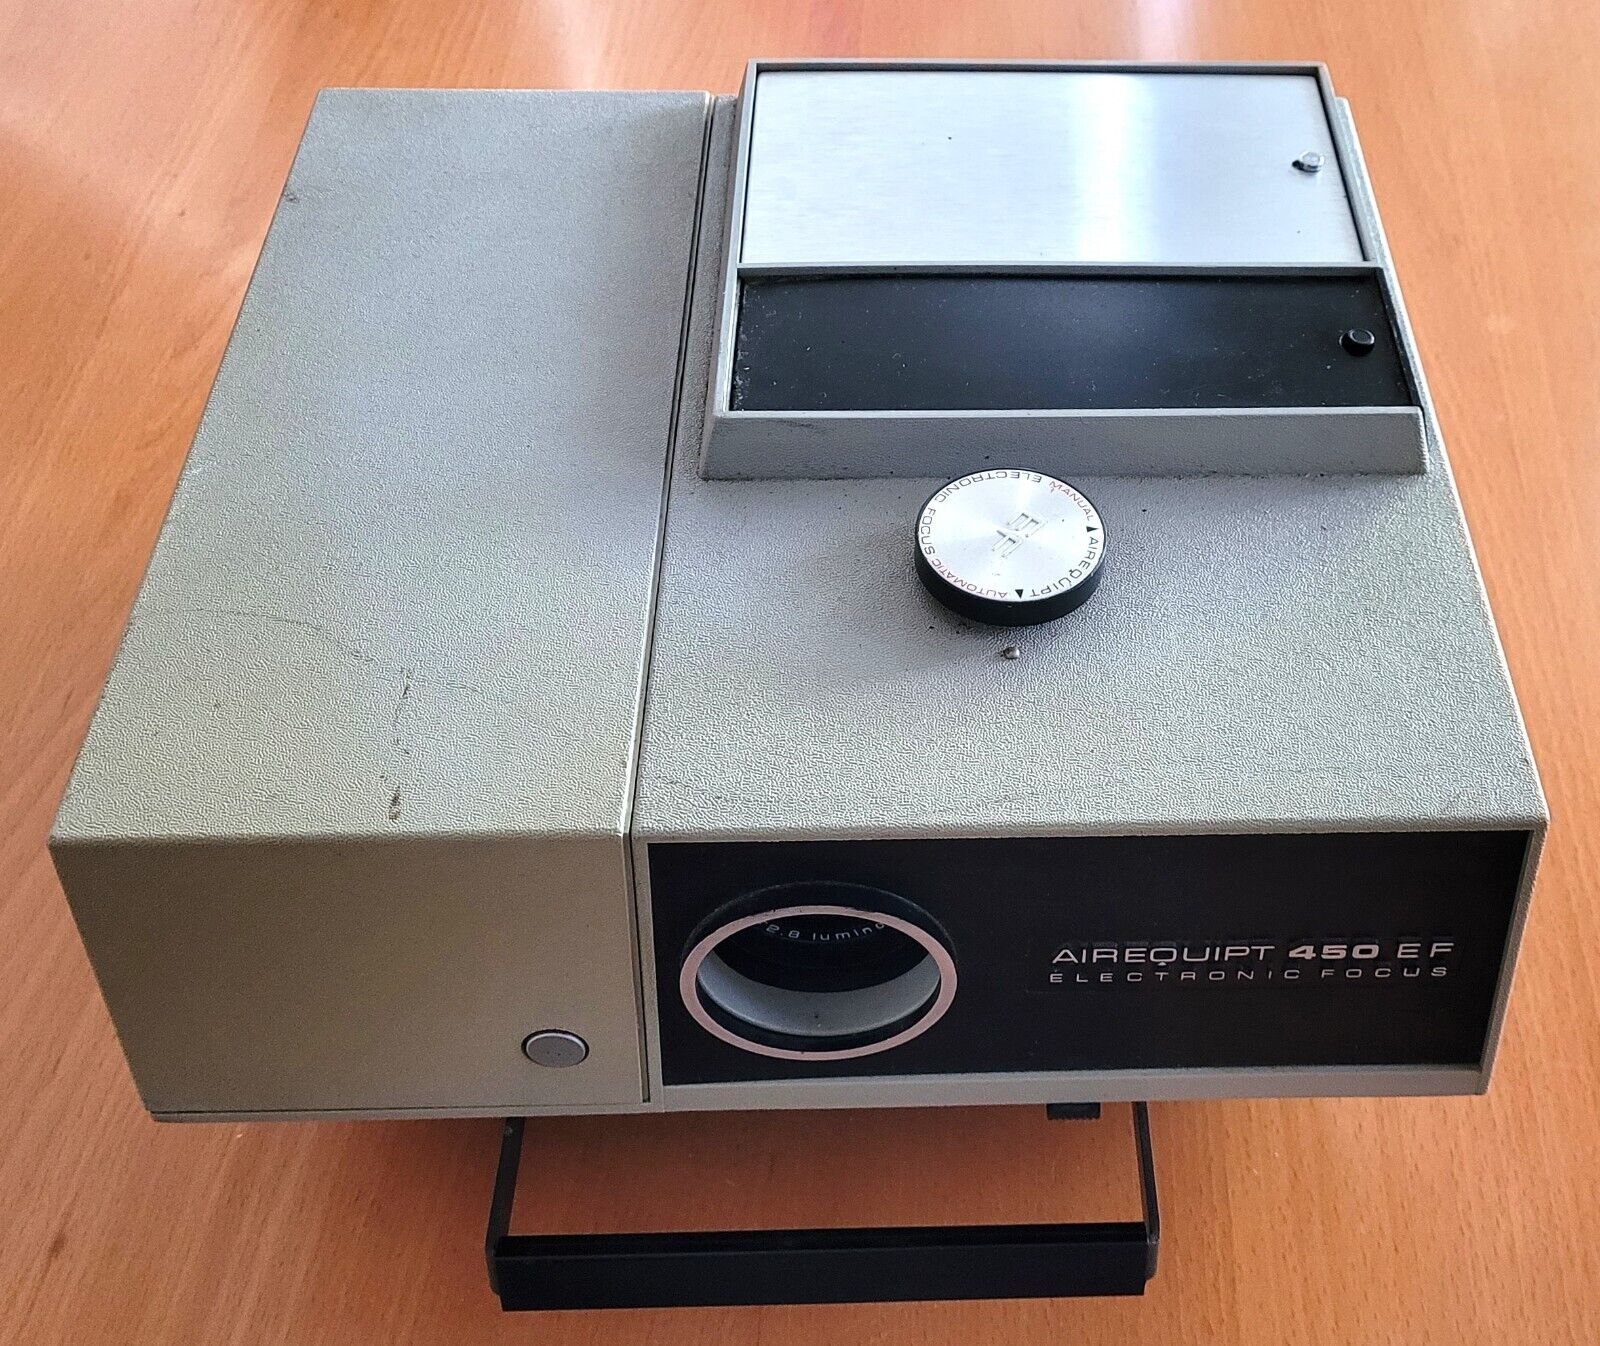 VINTAGE RARE AIREQUIPT 450 EF PROJECTOR WITH ELECTRONIC FOCUS